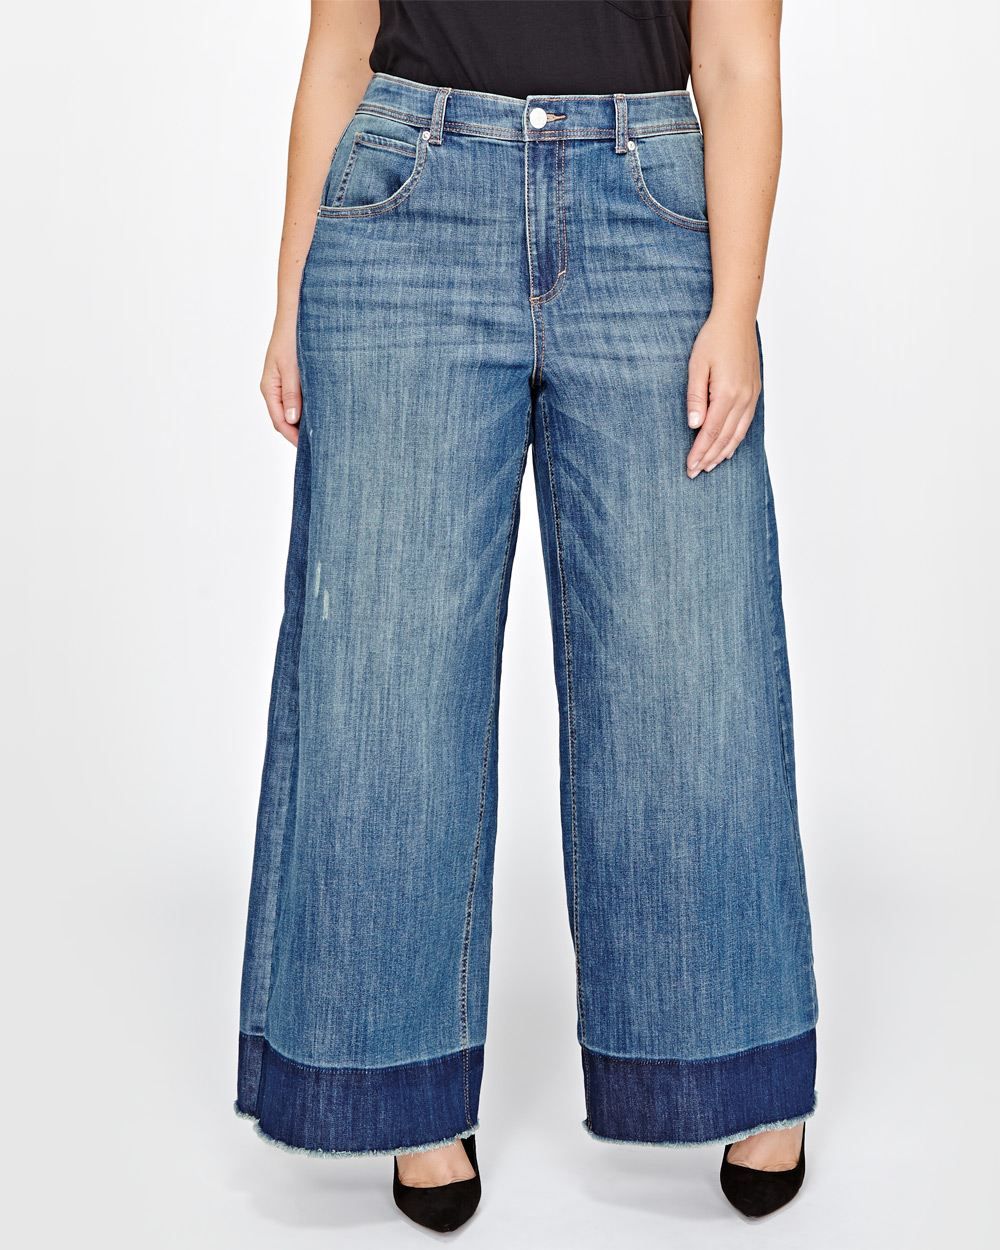 20+ pairs of plus-size jeans that are anything but blah